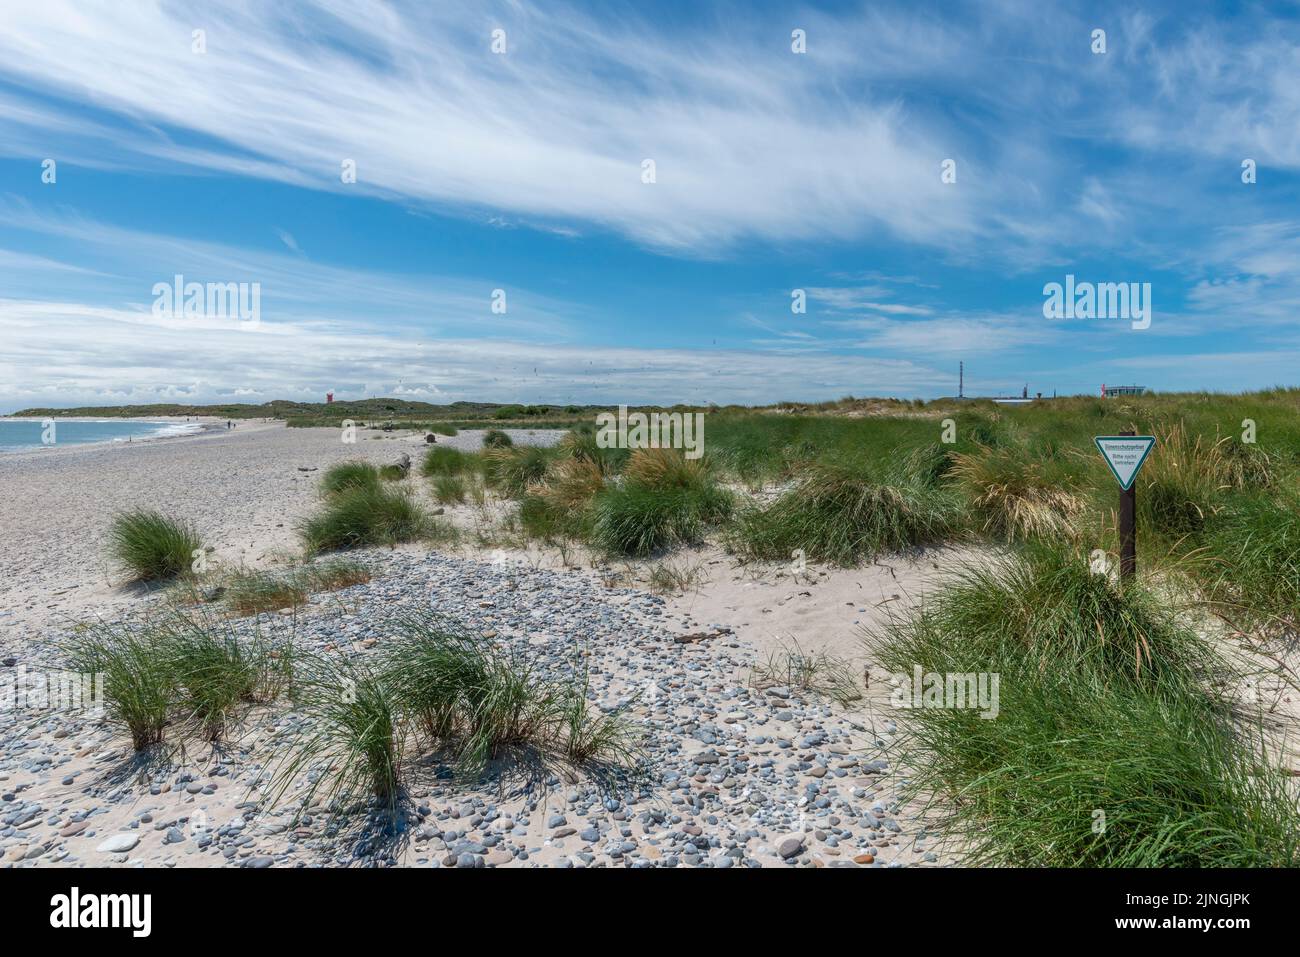 Dune protection area, no entry, high seas island The Dune, part of Heligoland, district Pinneberg, Schleswig-Holstein, Northern Germany Stock Photo